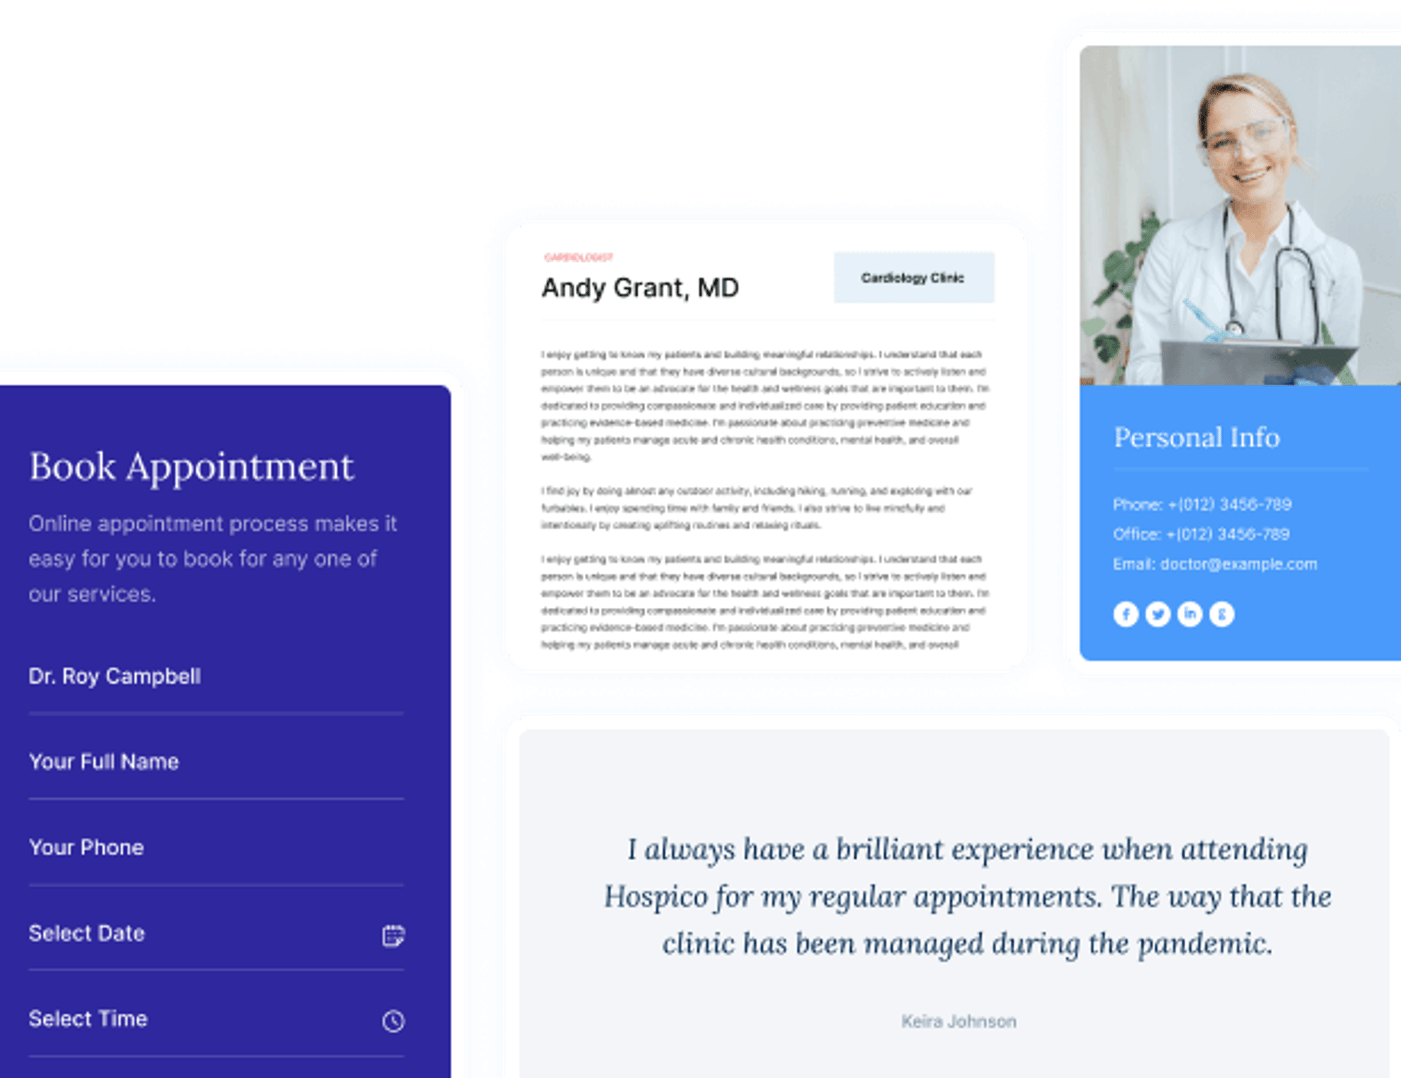 InClinic WordPress Theme - Doctors Pages